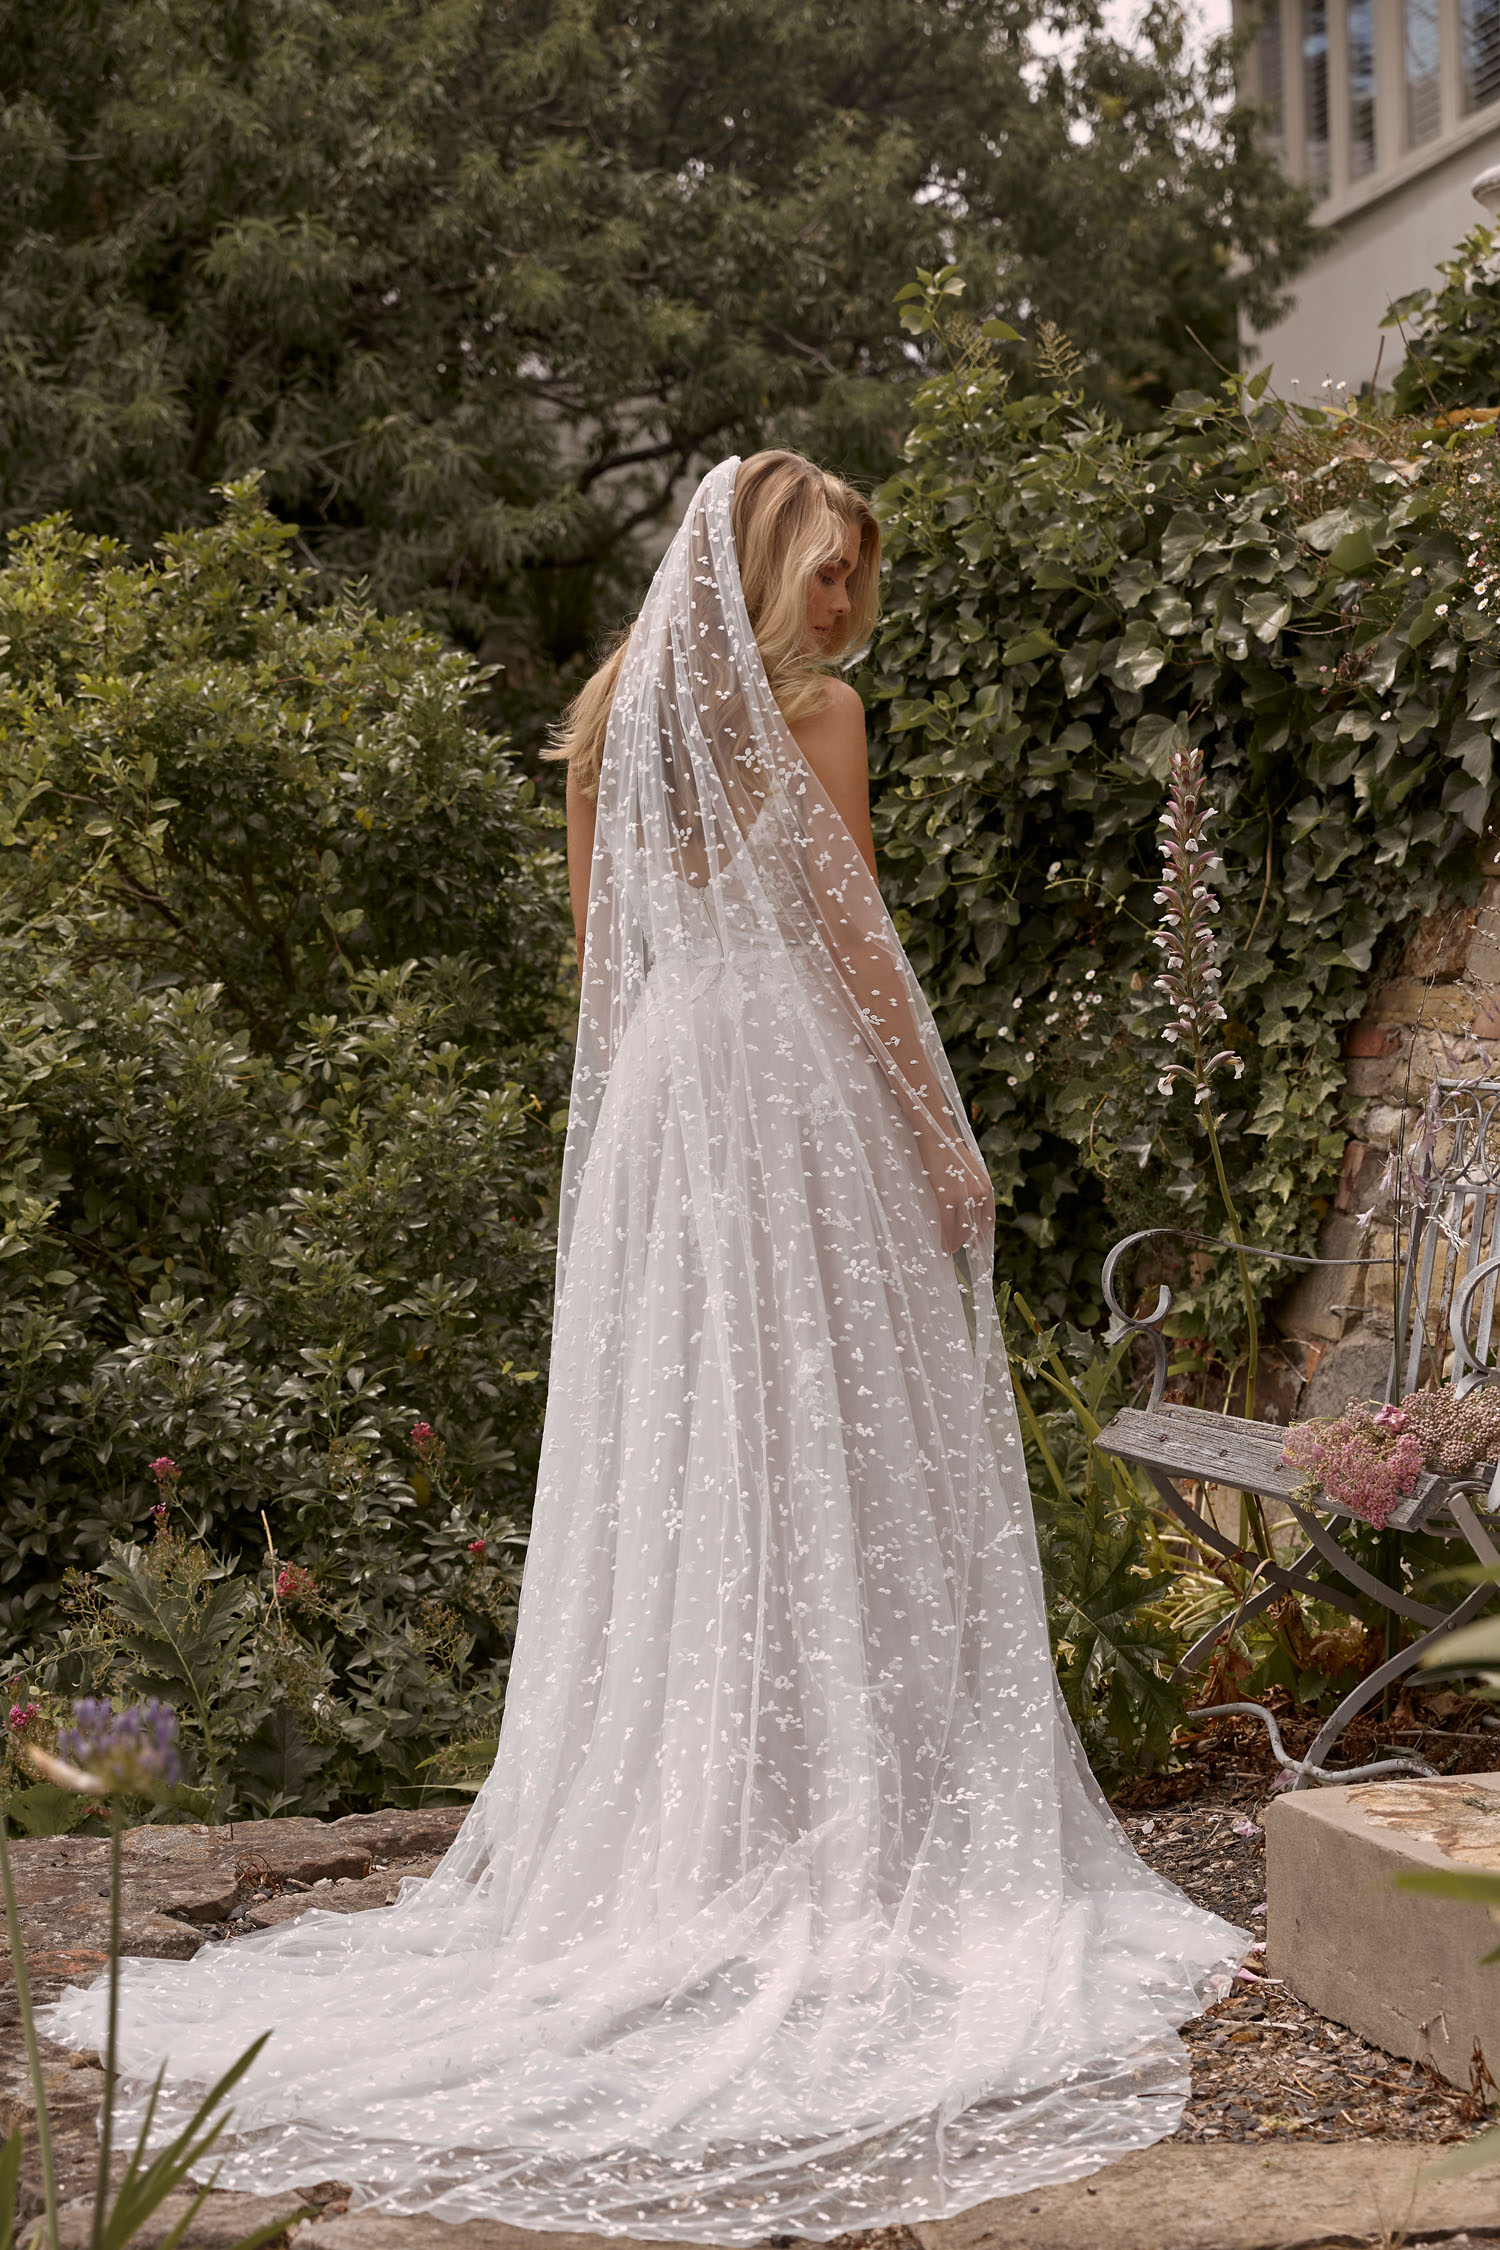 https://luvbridal.com.au/wp-content/uploads/2021/09/CATE-ML20033-FULL-LENGTH-A-LINE-FLORAL-LACE-AND-SPOTTED-TULLE-THIN-STRAPS-V-ILLUSION-BACK-ZIPPER-MATCHING-VEIL-WEDDING-DRESS-MADI-LANE-BRIDAL-10.jpeg